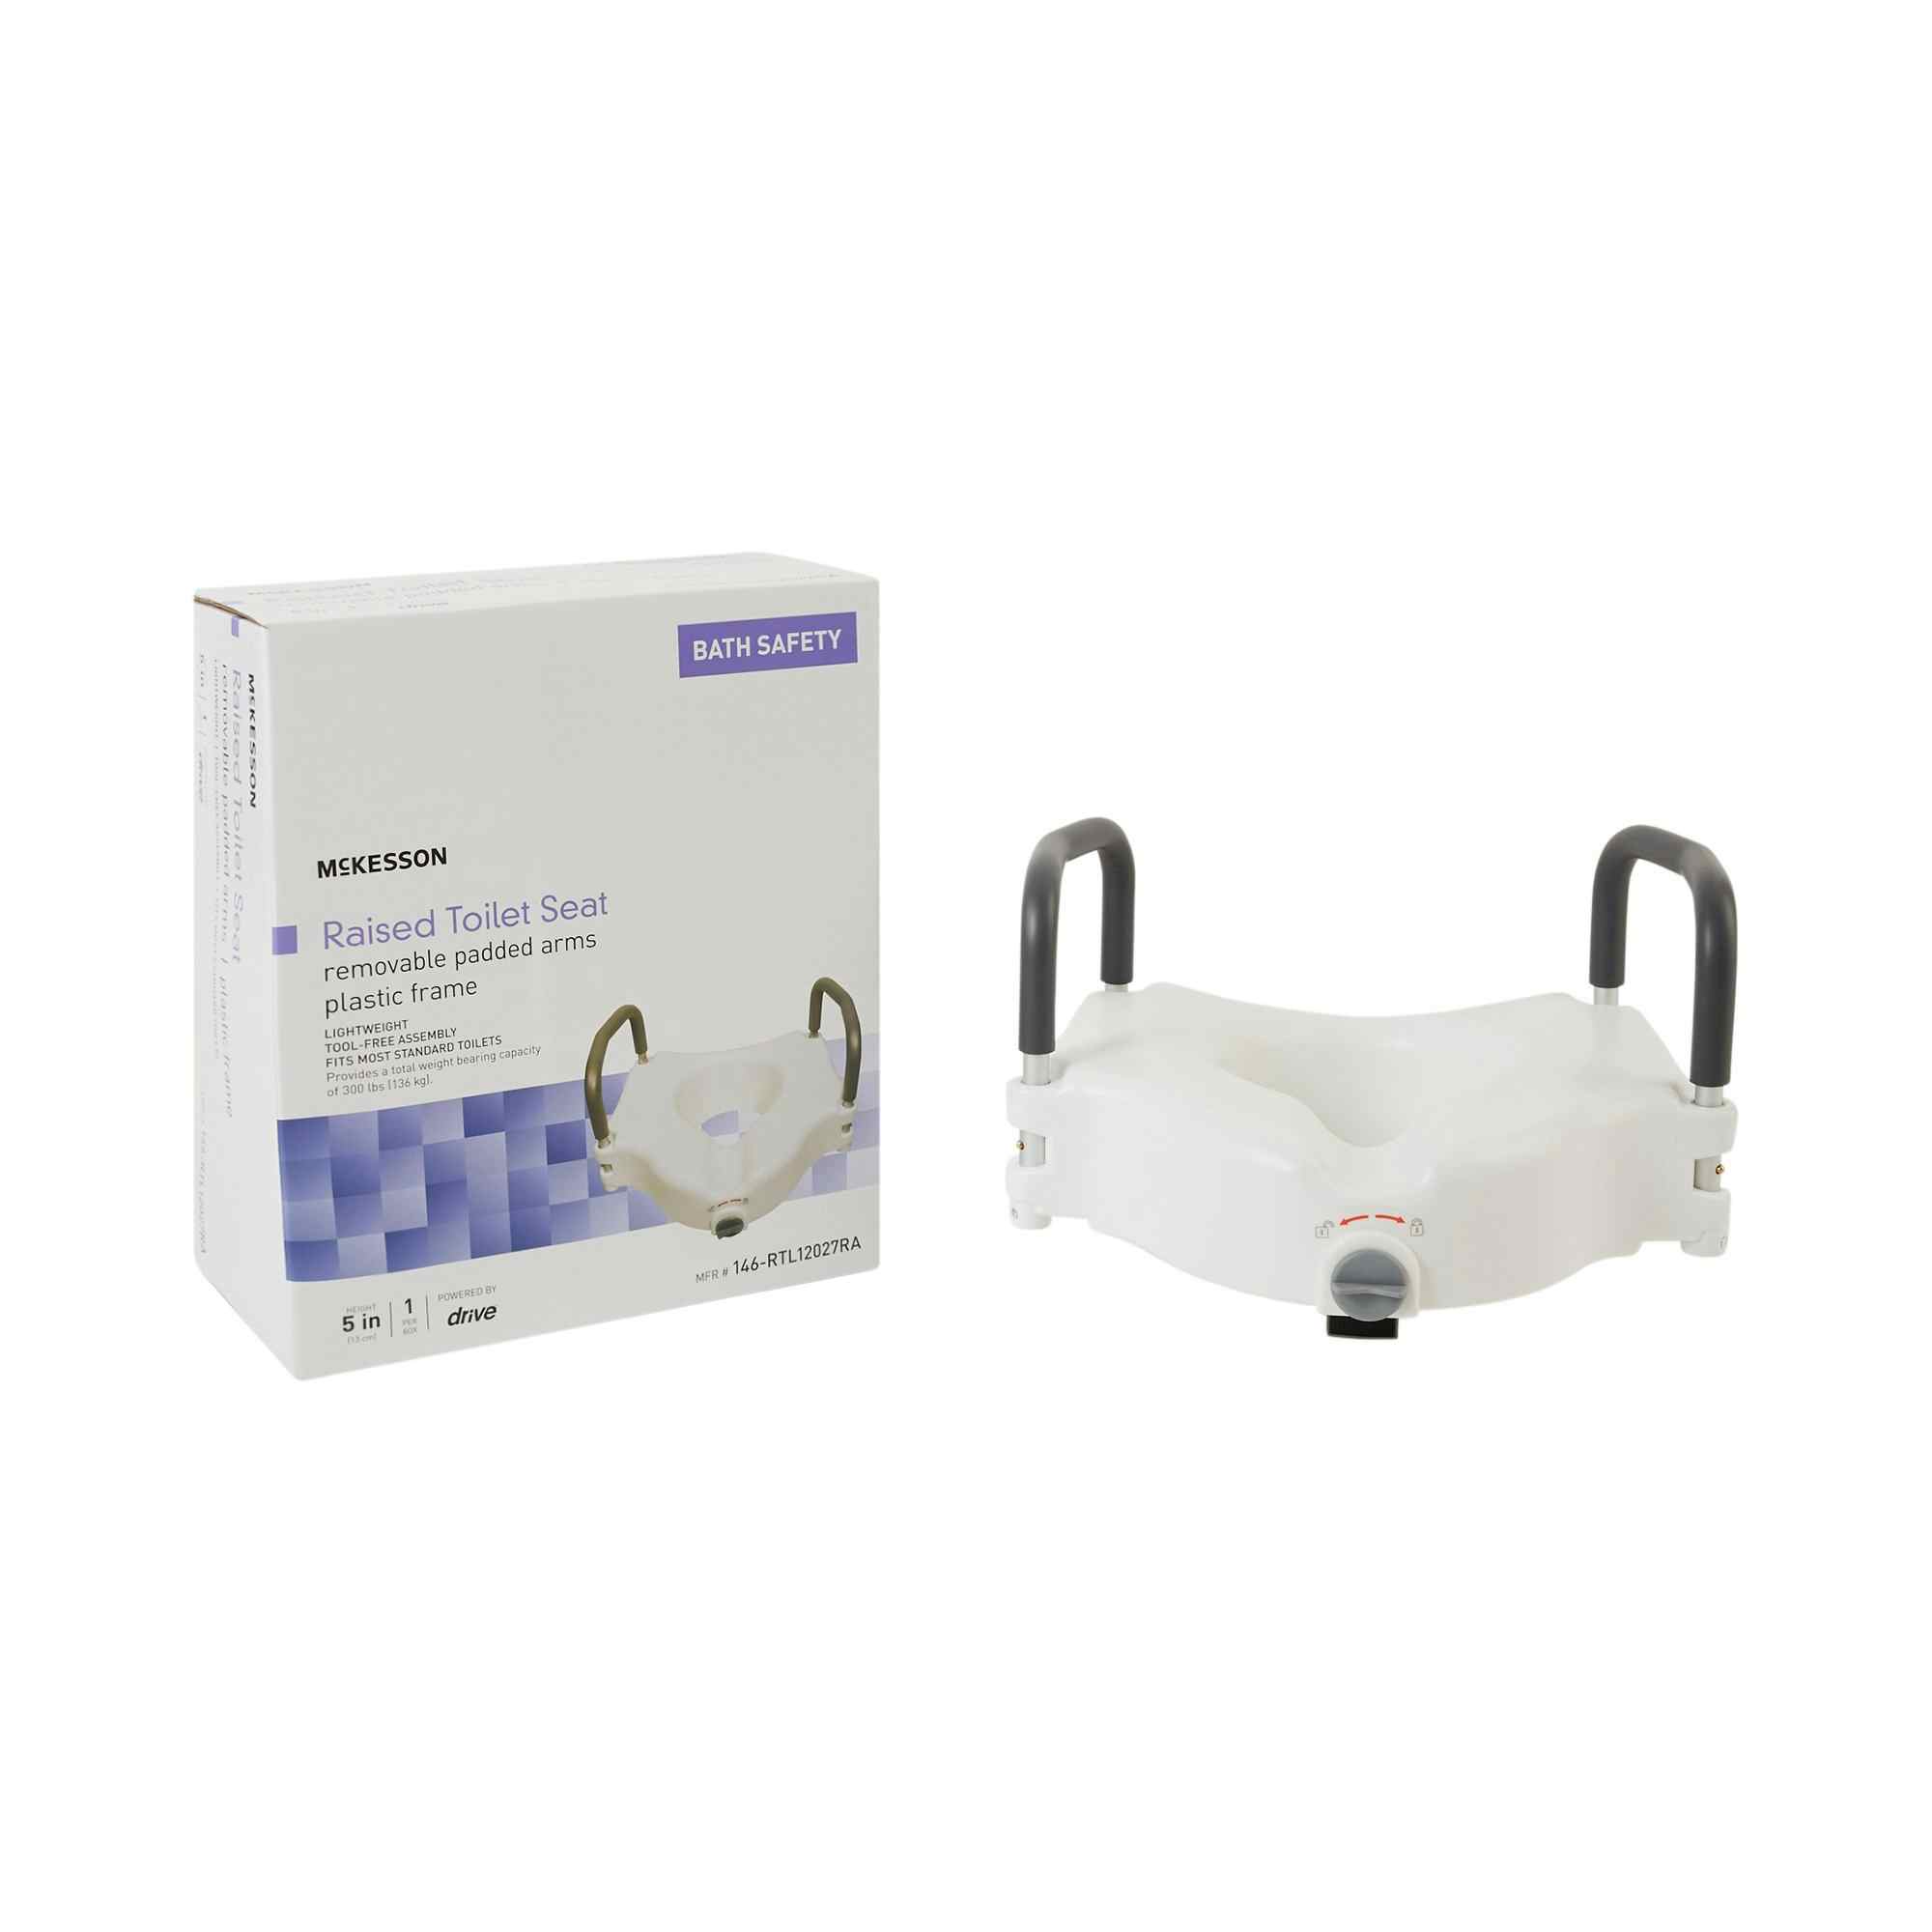 McKesson Raised Toilet Seat, Removable Padded Arms, Plastic Frame, 5" Height